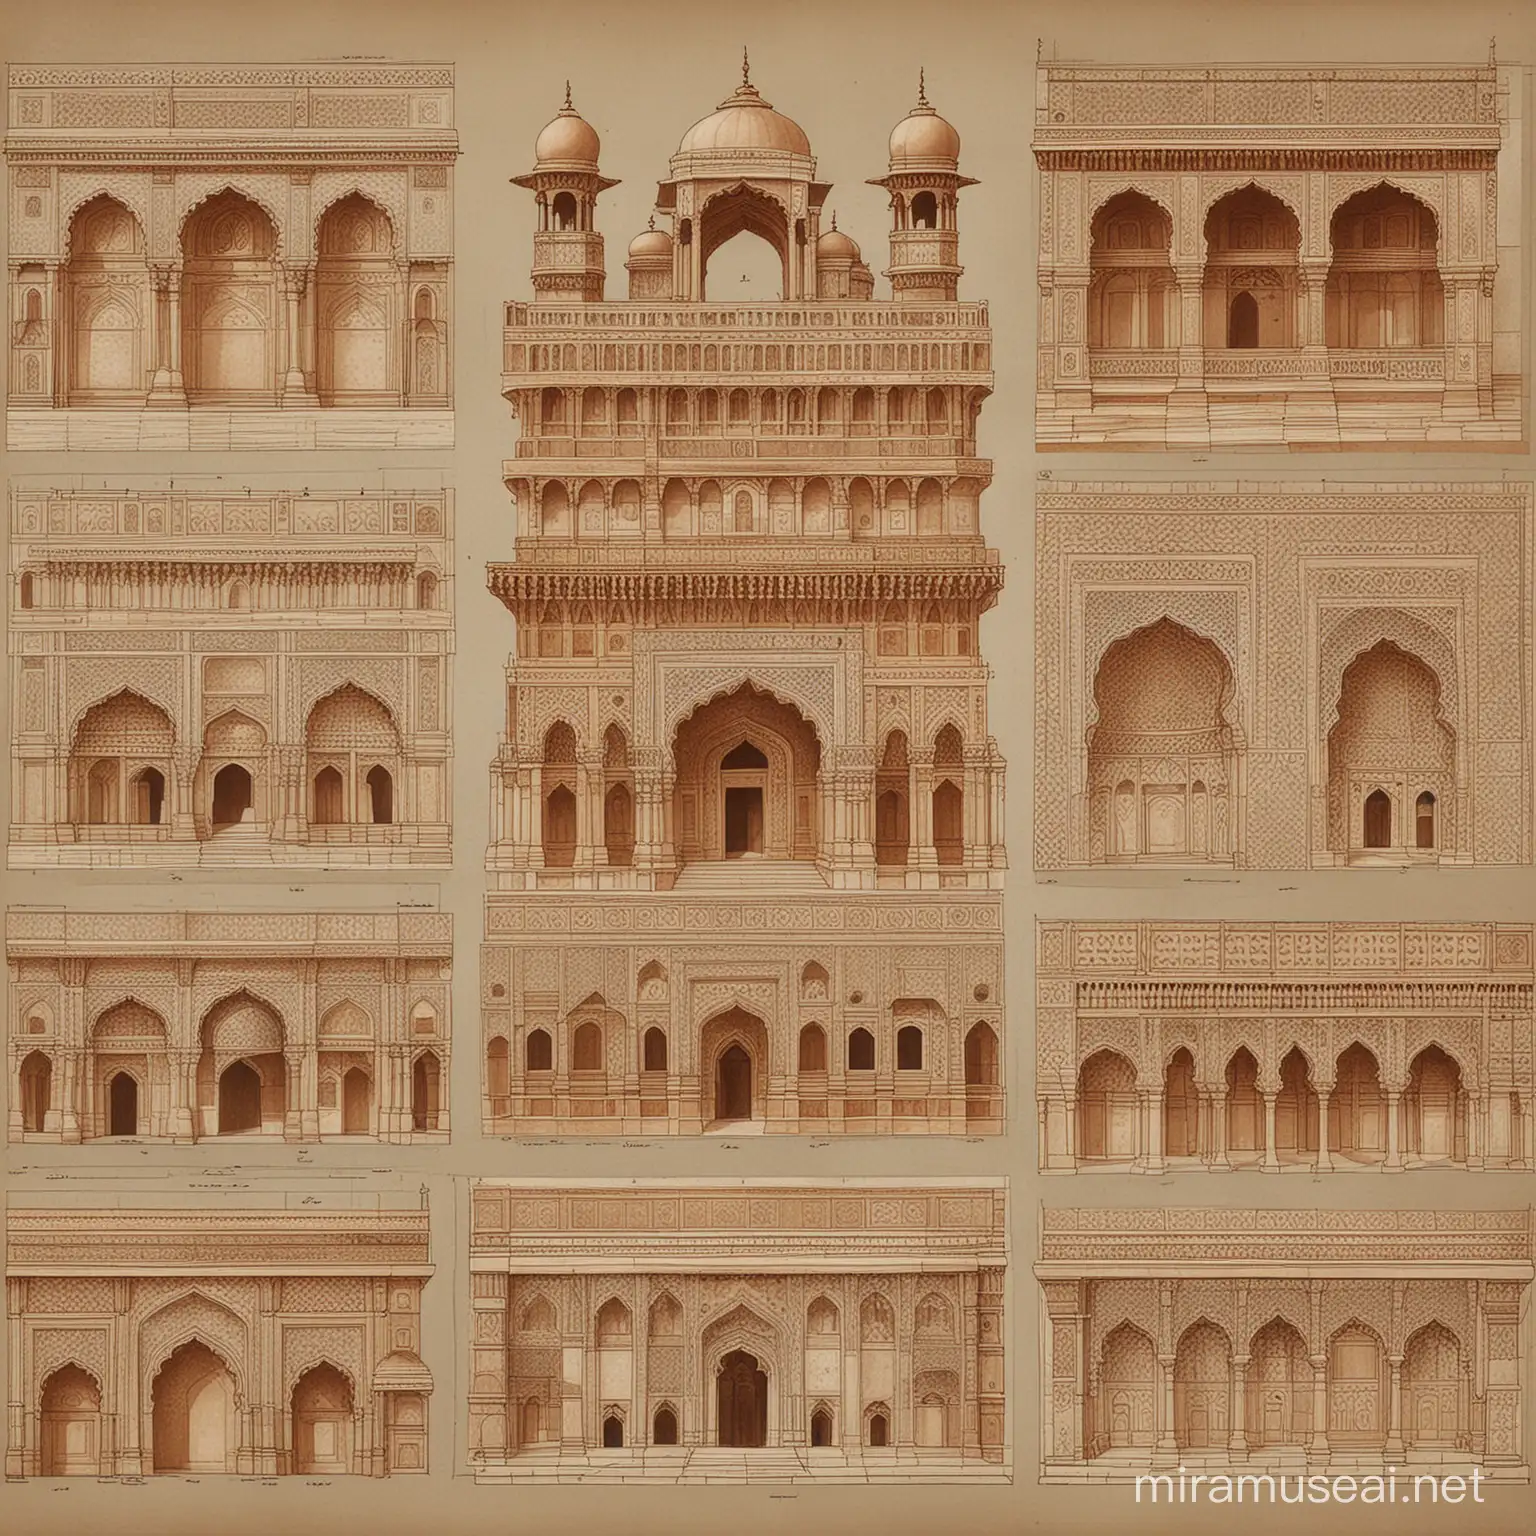 concept sheet on mughal architectural elements